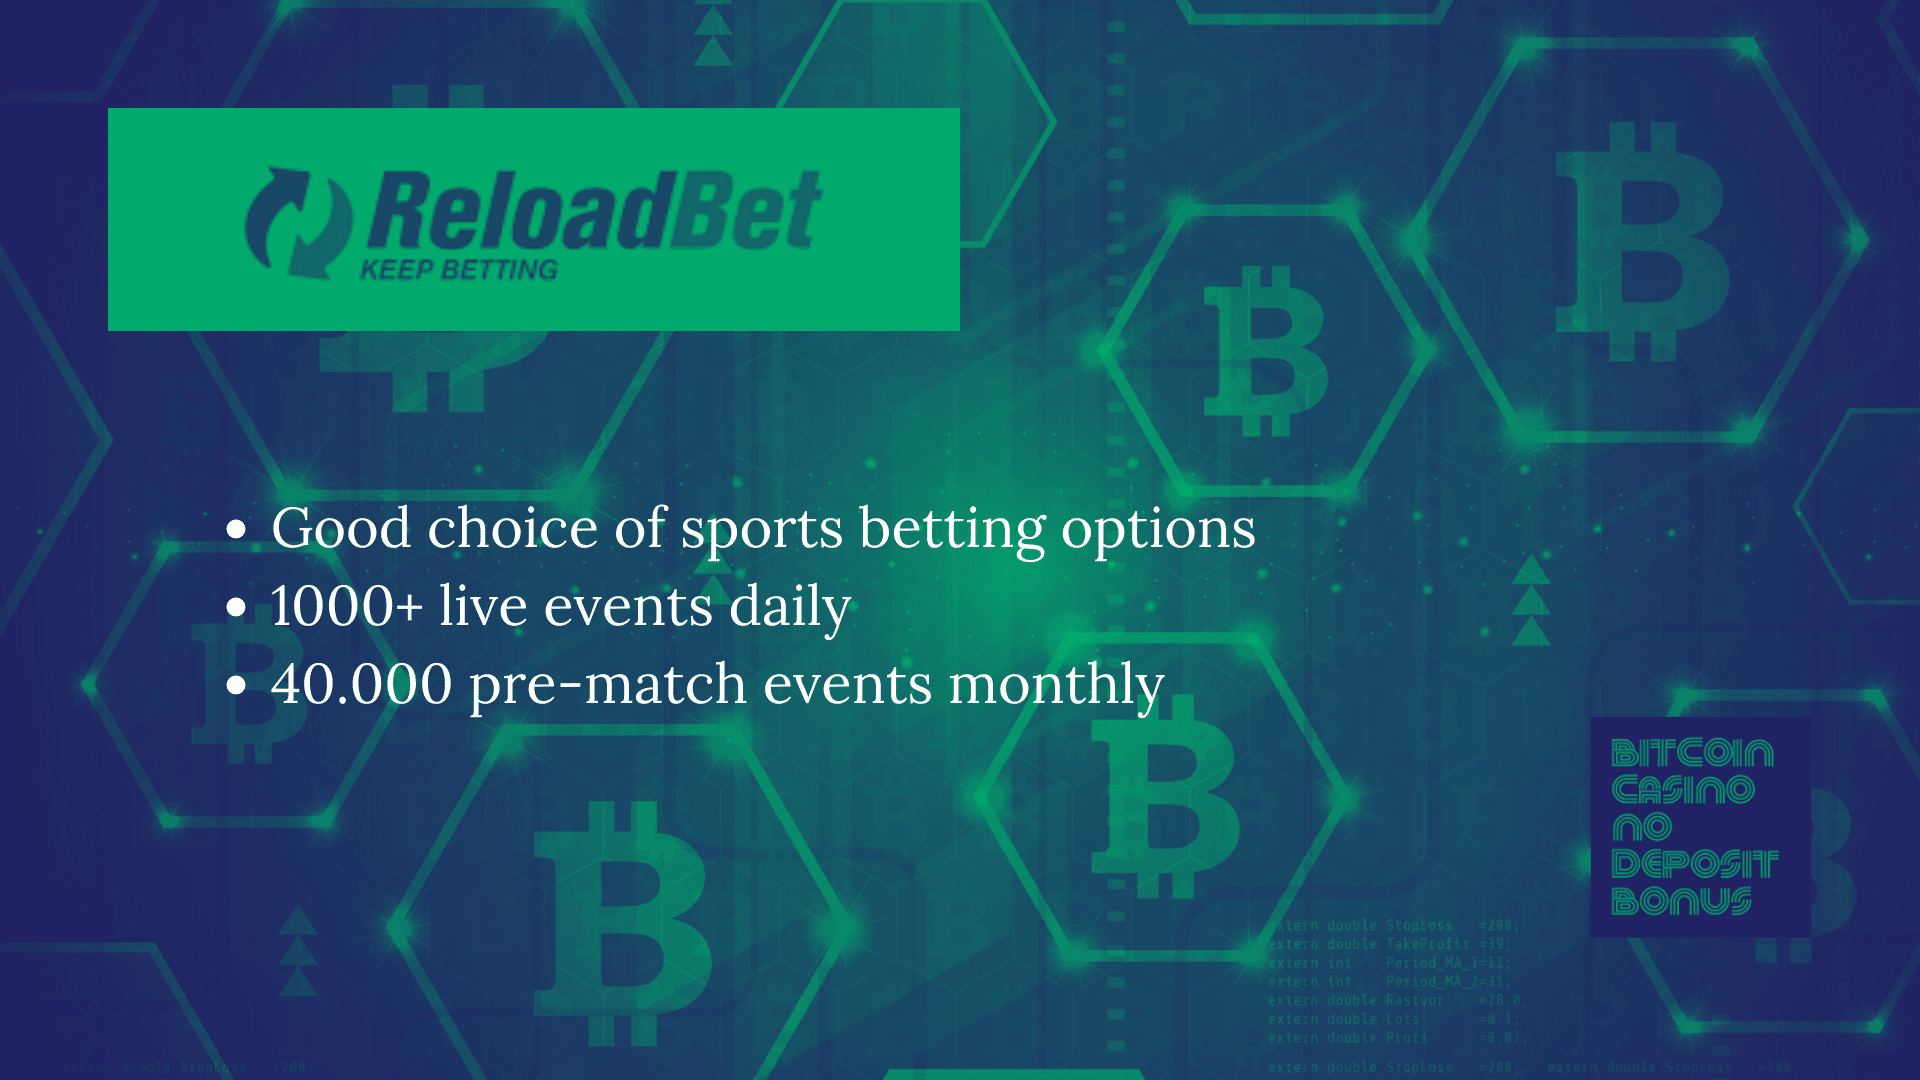 You are currently viewing ReloadBet Promo Codes – ReloadBet.com Free Coupons November 2022